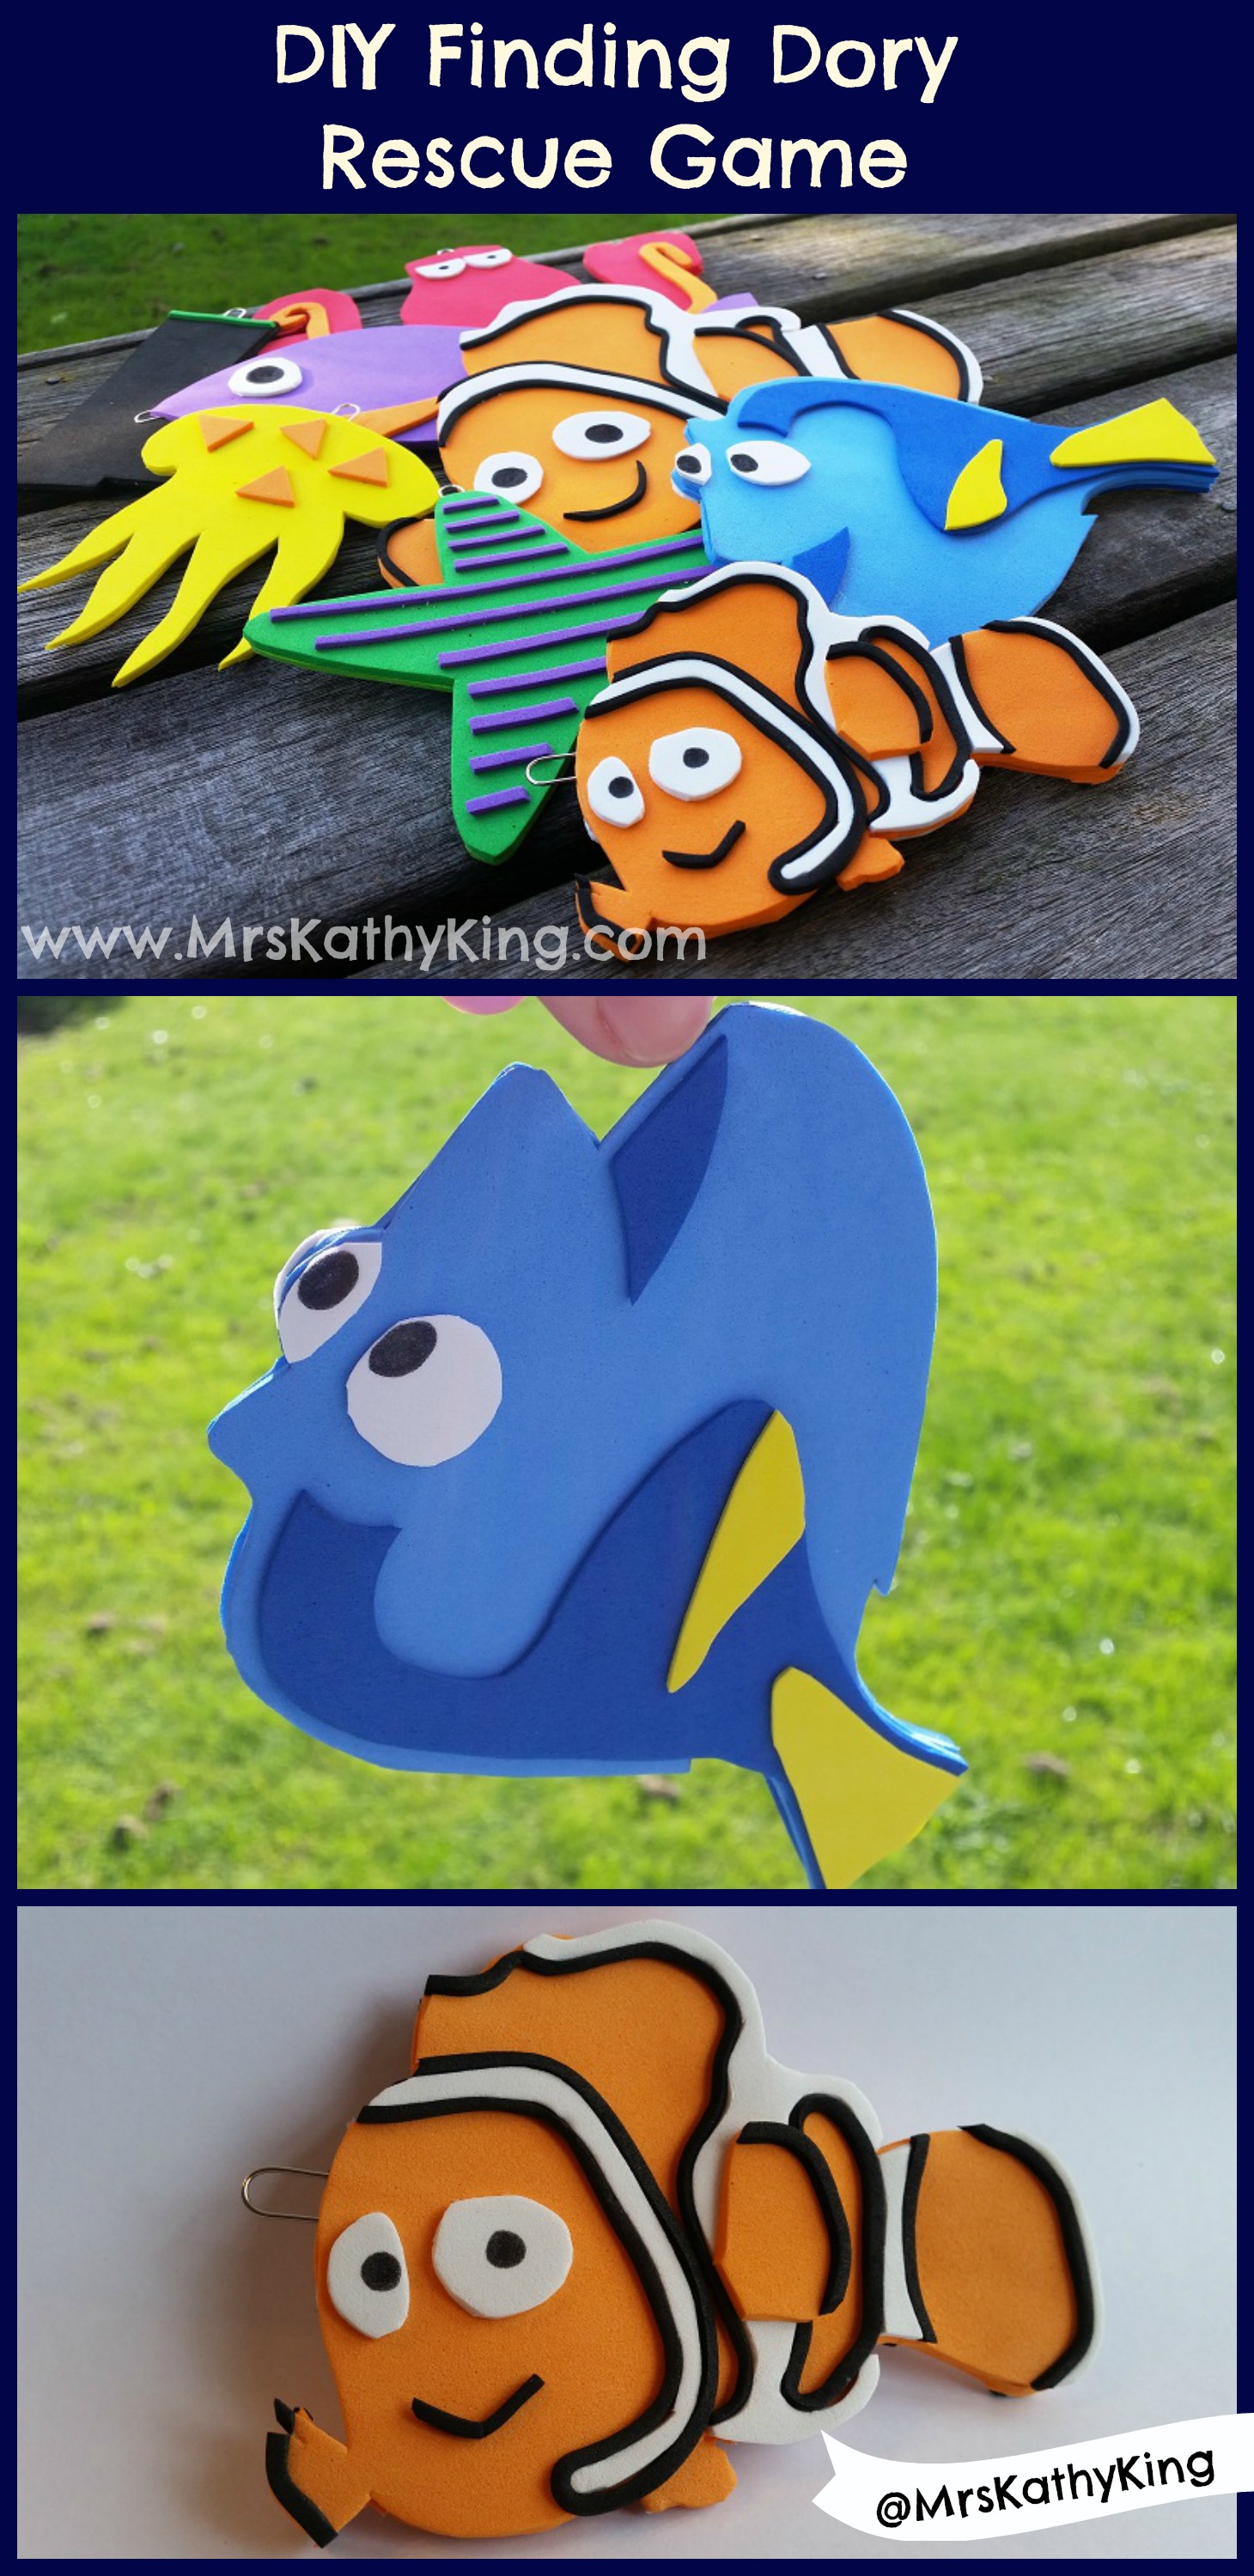 DIY Finding Dory Game